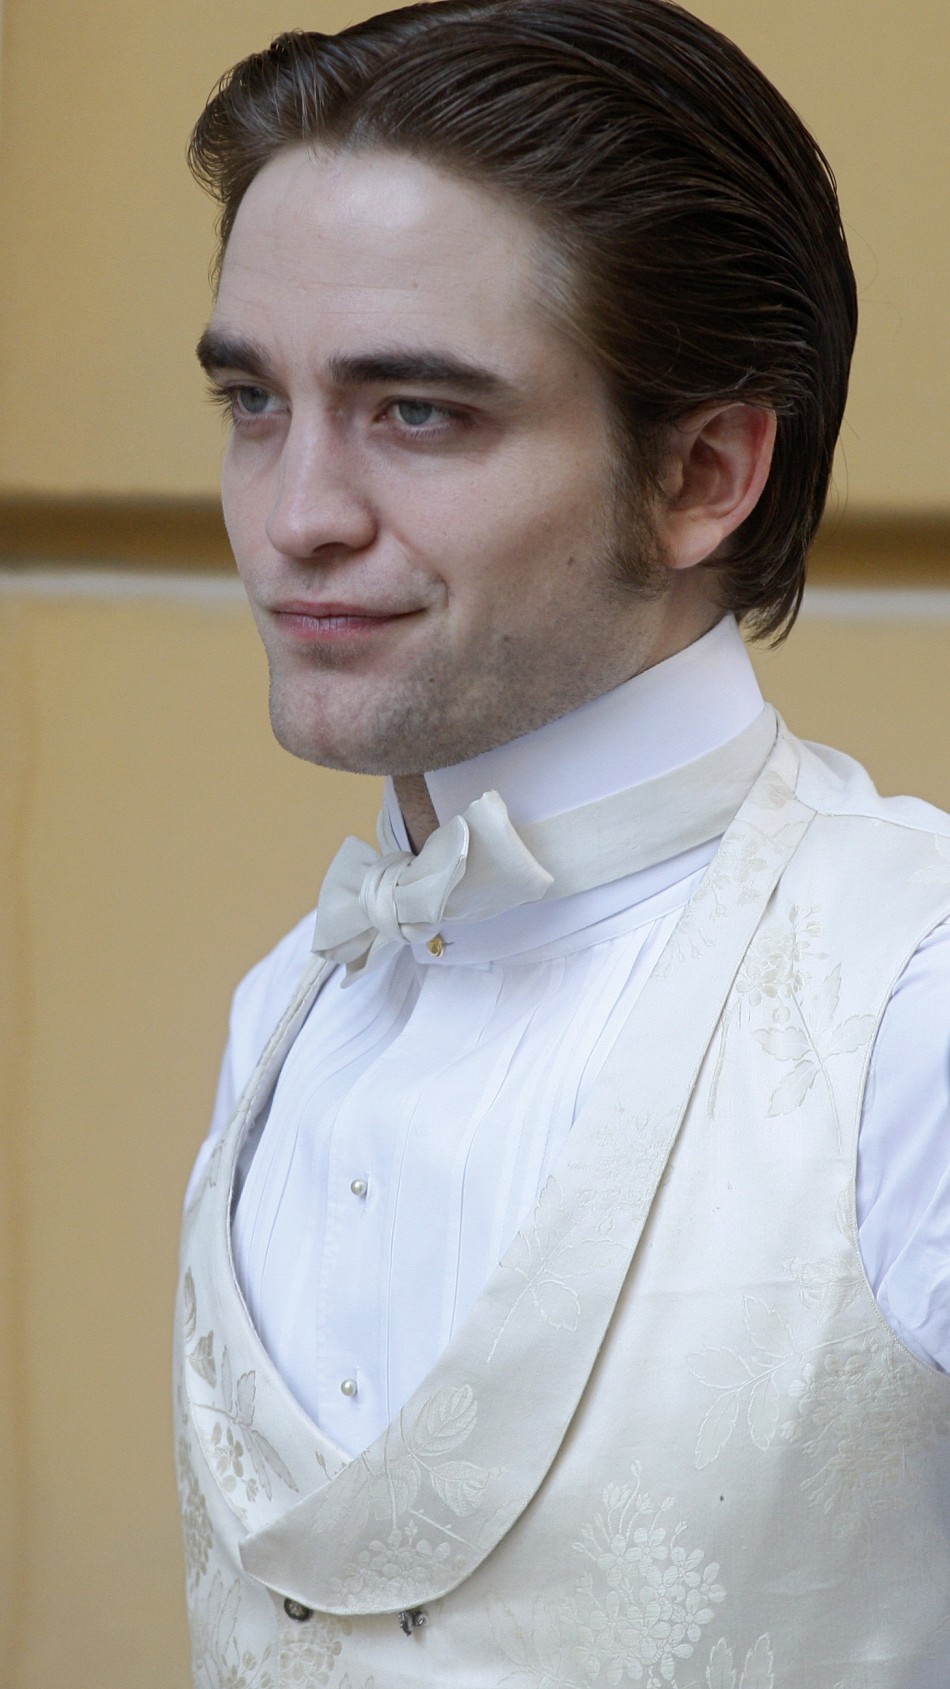 British actor Robert Pattinson is seen during the filming of a scene in his new movie quotBel Amiquot in Budapest April 8, 2010.